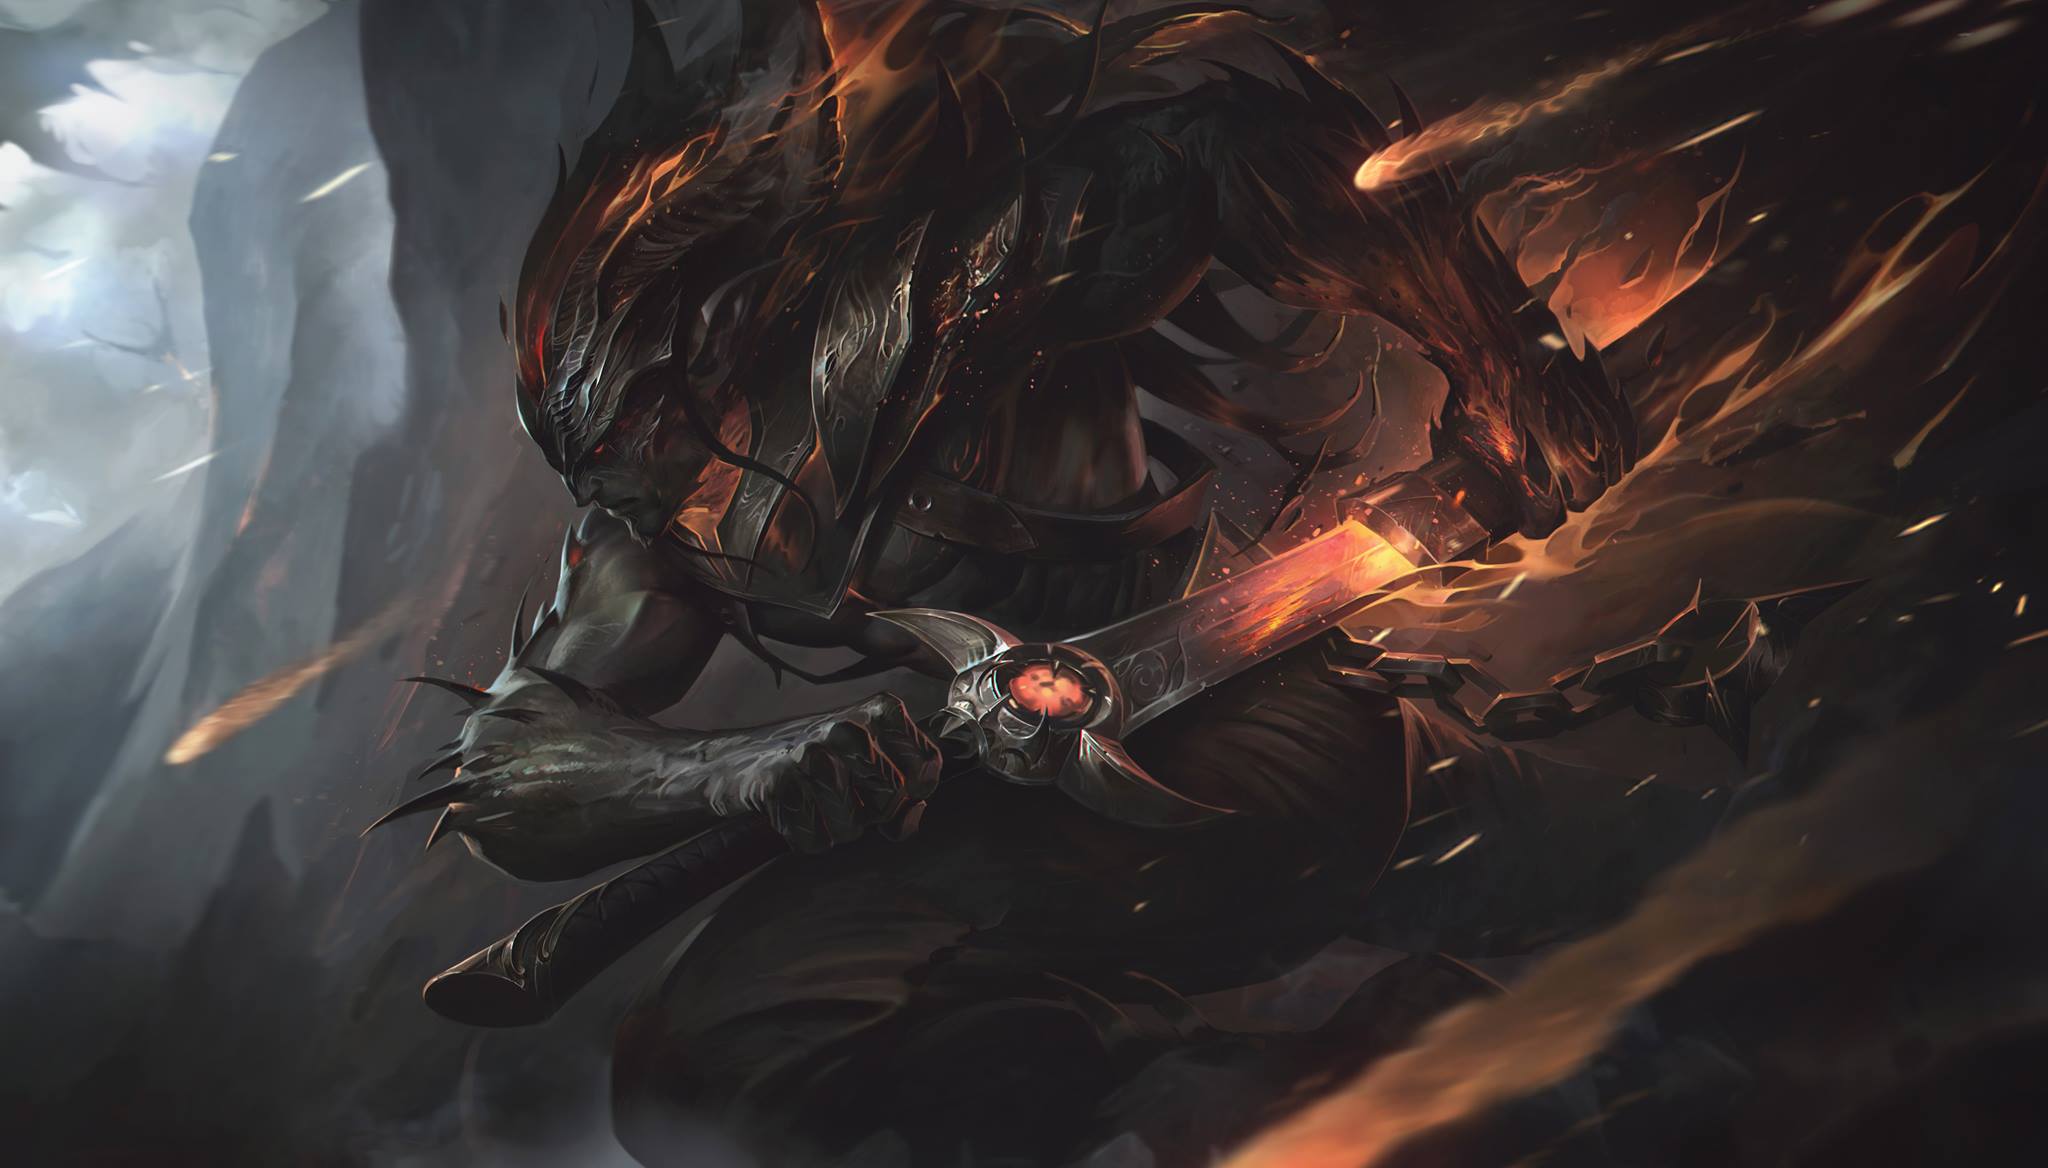 2932x2932201976 Yasuo and Yone League Of Legends 2932x2932201976 Resolution  Wallpaper HD Games 4K Wallpapers Images Photos and Background   Wallpapers Den